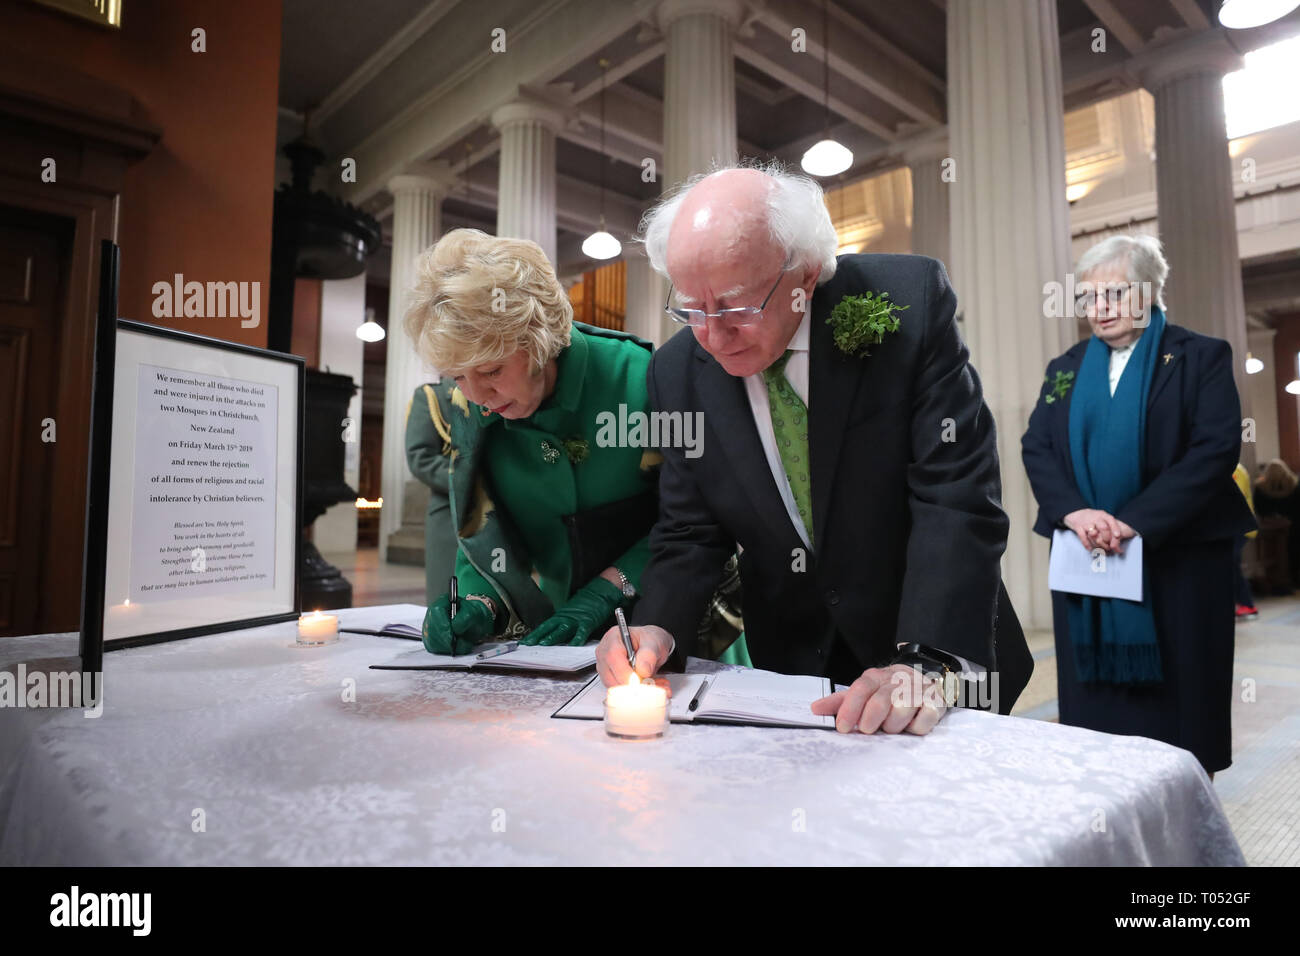 President Michael D Higgins and his wife Sabina sign a book of condolence before a memorial service for the victims of the New Zealand Mosque attacks at St Marys Pro Cathederal in Dublin. Stock Photo